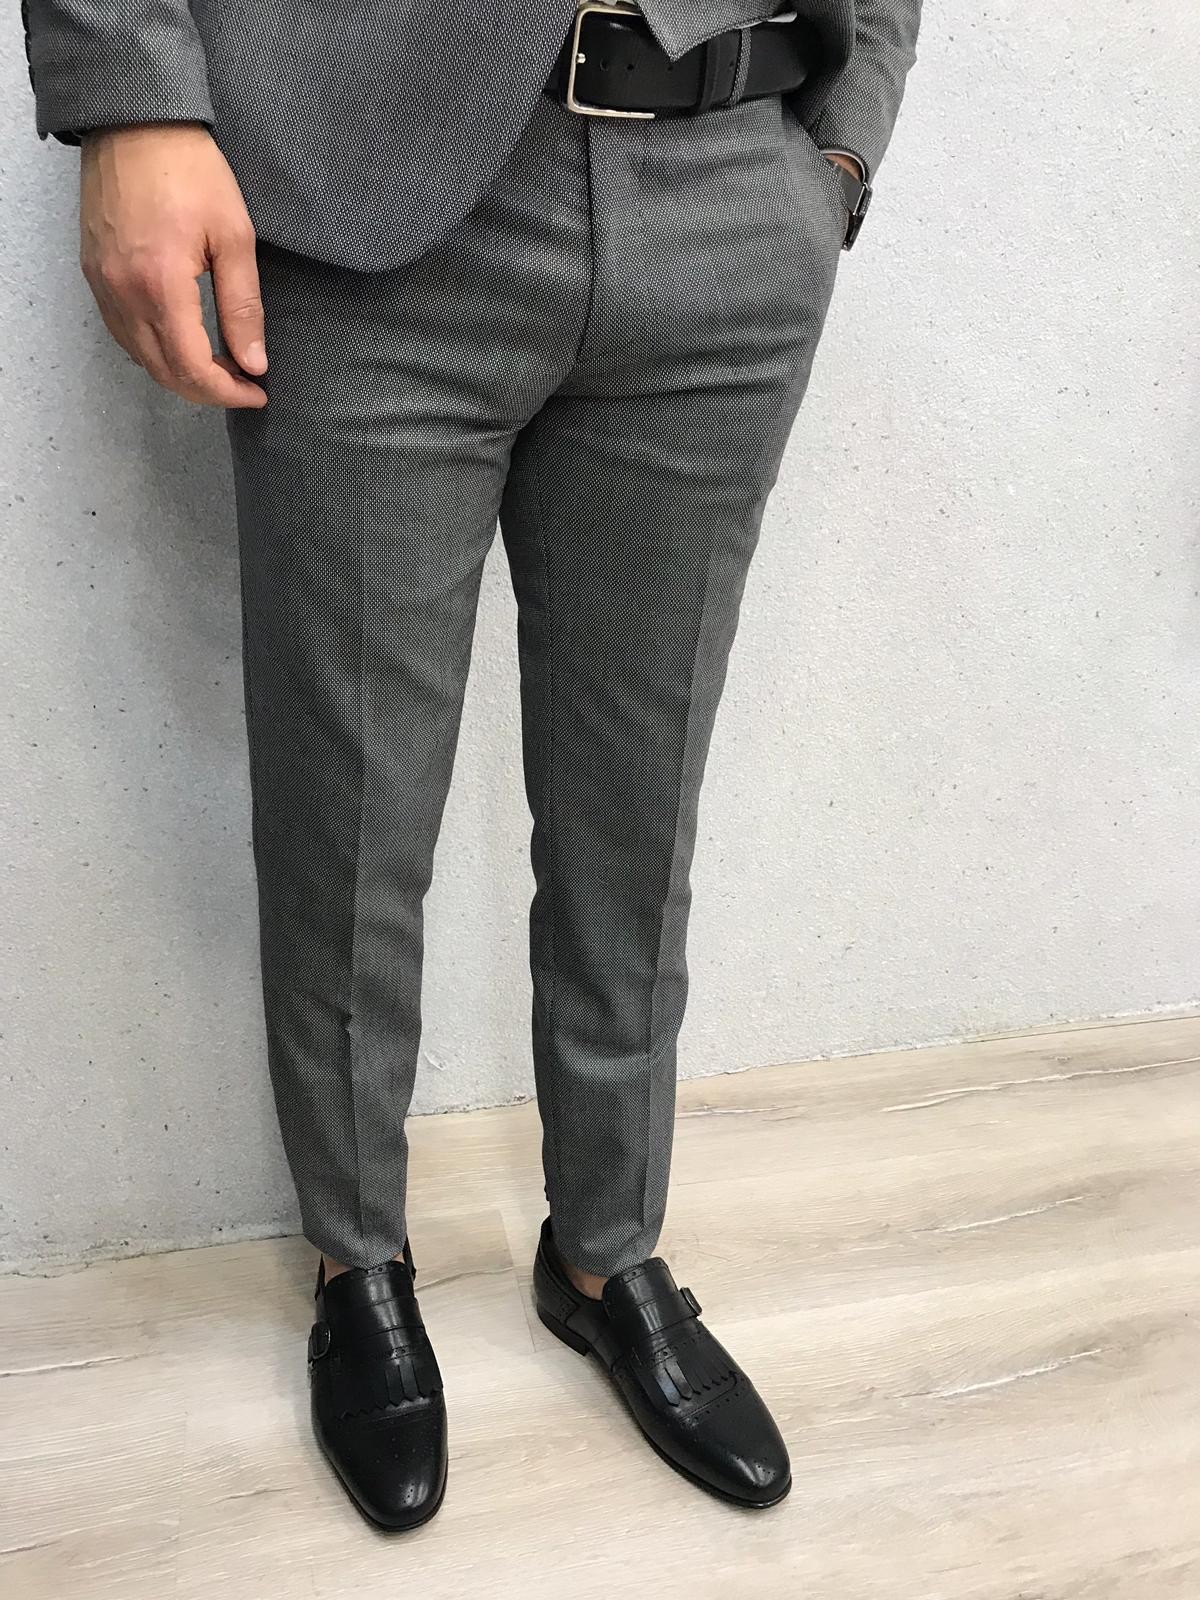 Buy Gray Slim Fit Wool Suit by Gentwith.com with Free Shipping